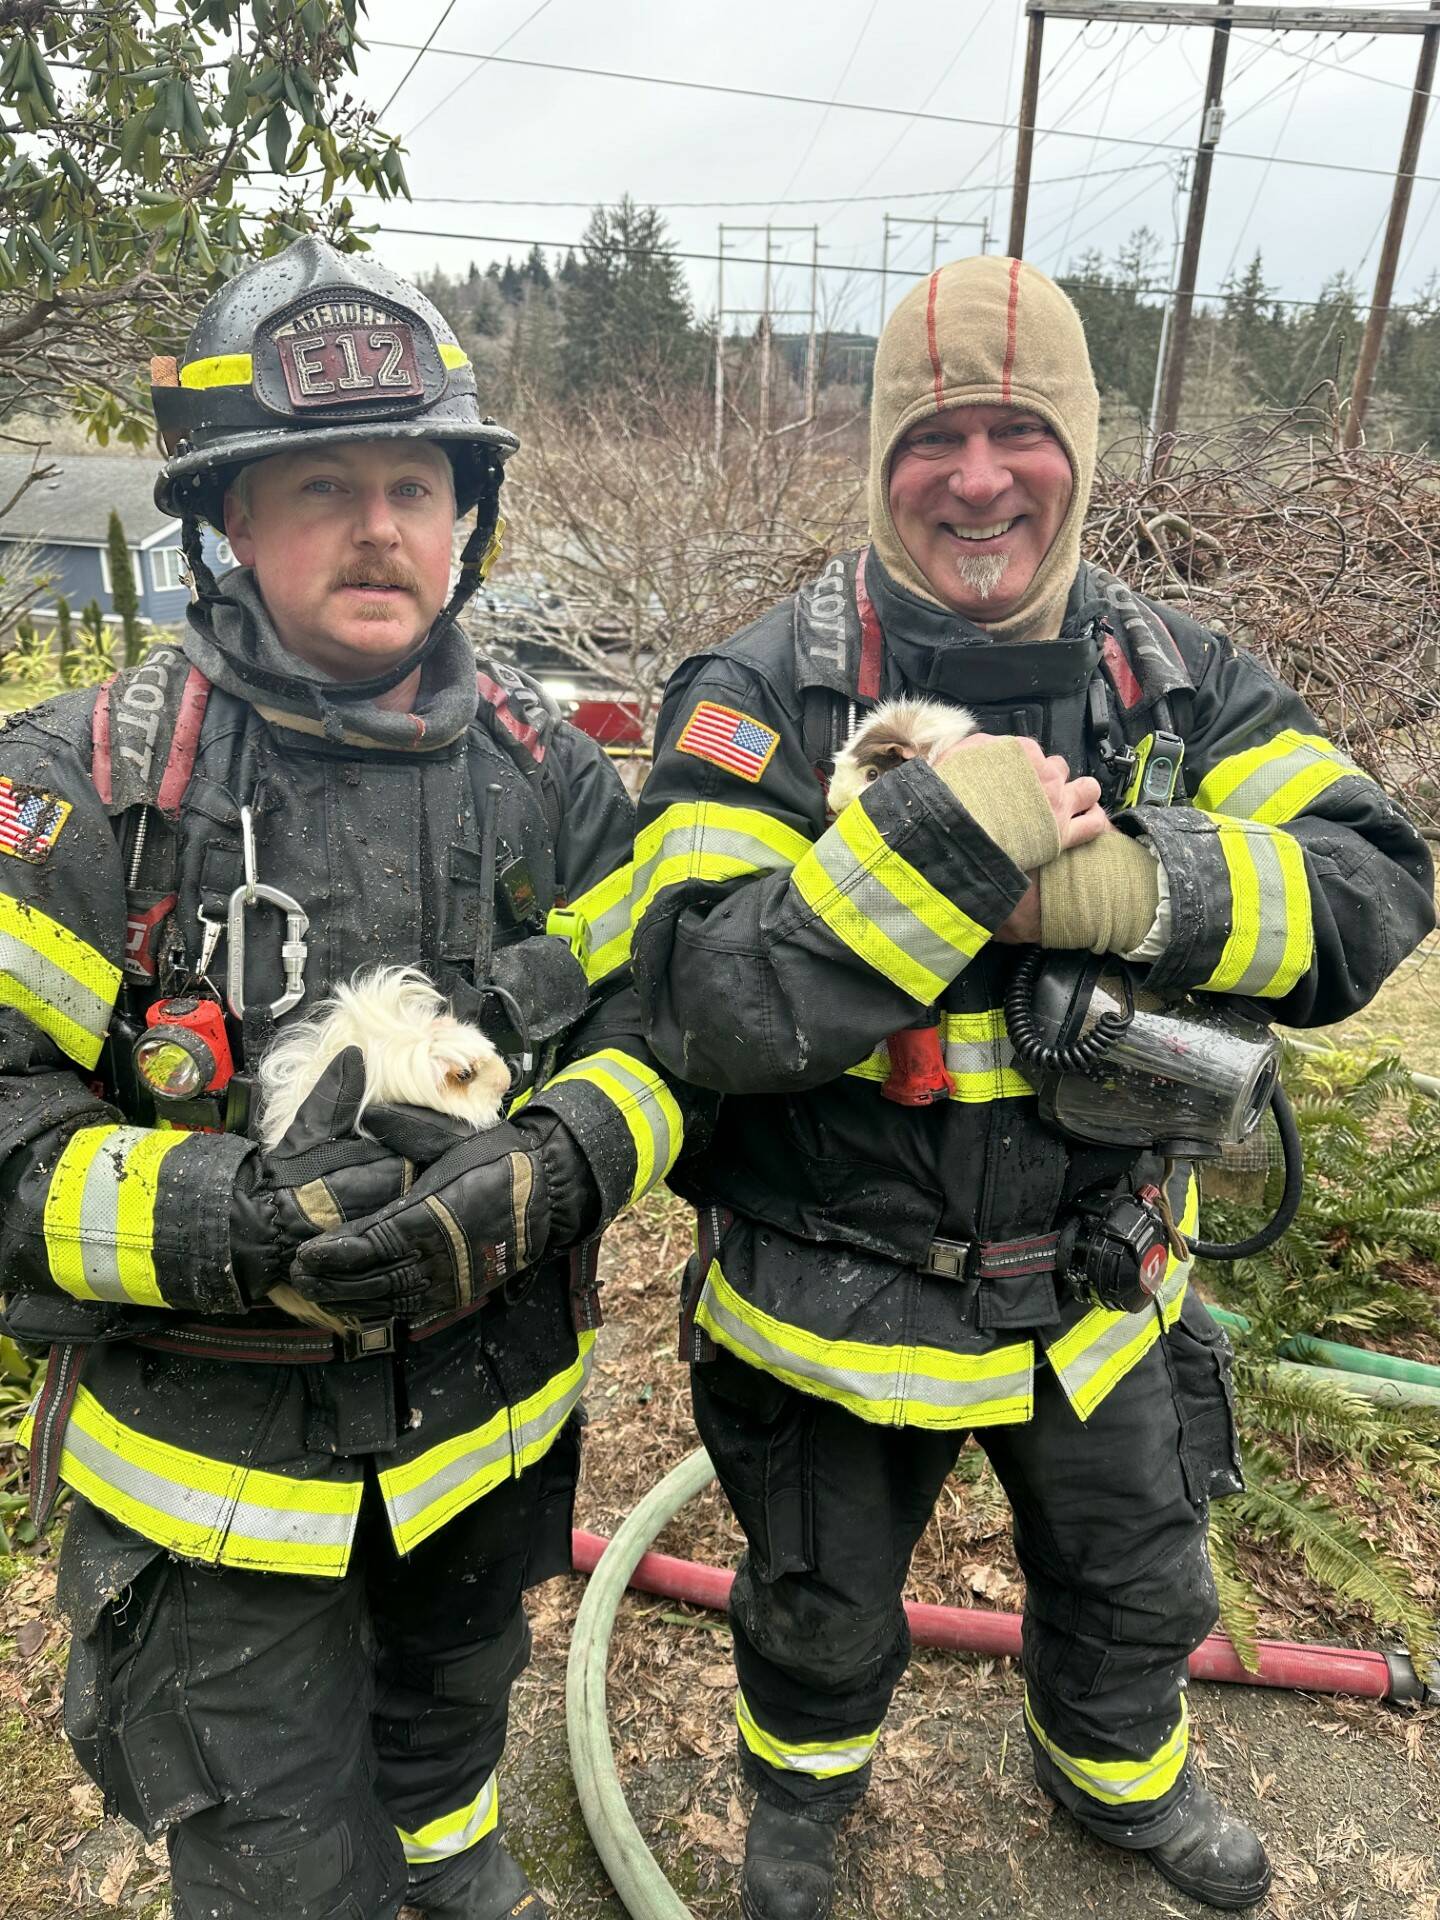 Courtesy photo / AFD
Firefighters responding to an Aberdeen structure fire Saturday managed to rescue all human residents- and two guinea pigs- without incident, according to an AFD social media post.